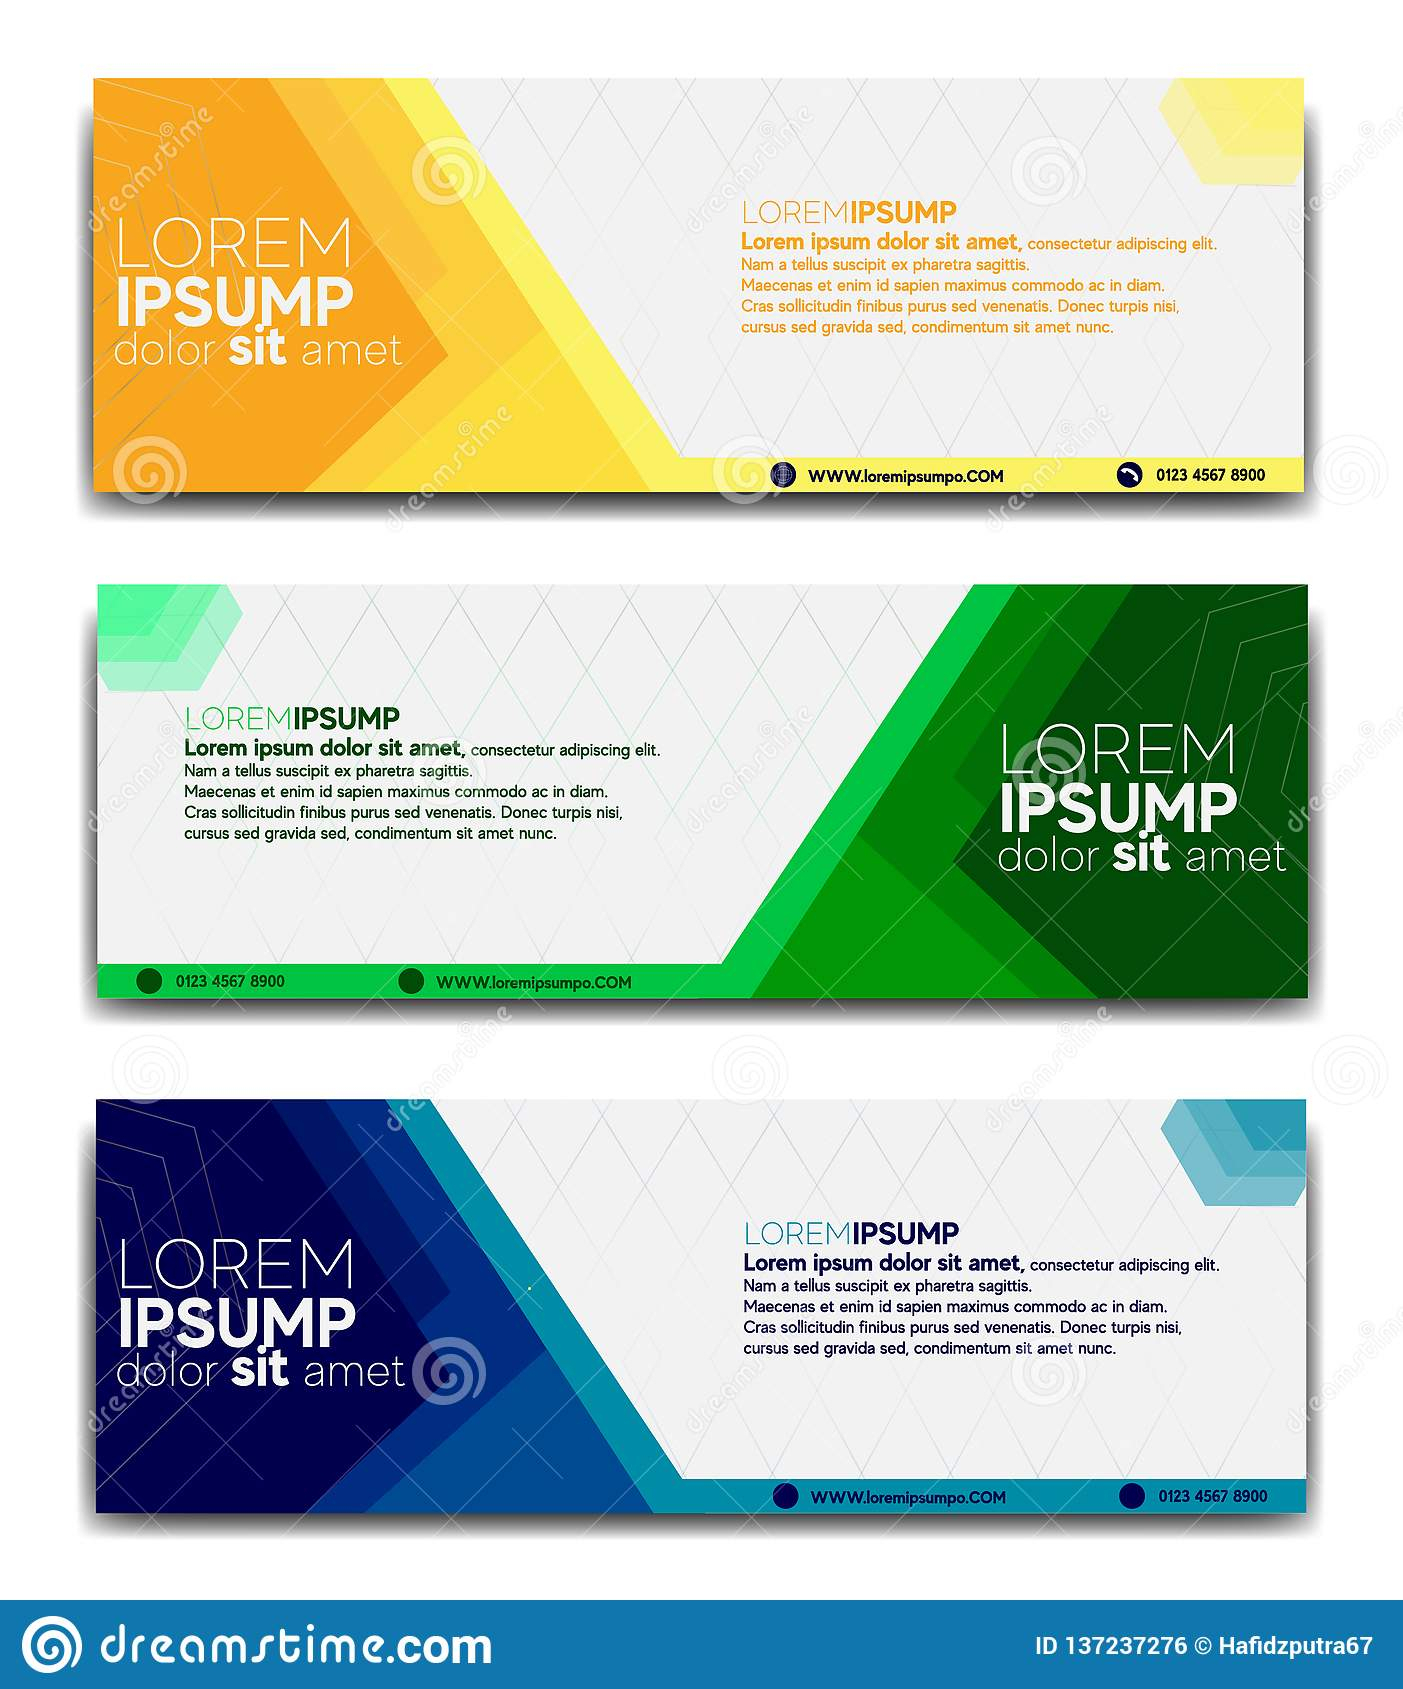 Promotional Banner Design Template 2019 Stock Vector Regarding Website Banner Design Templates